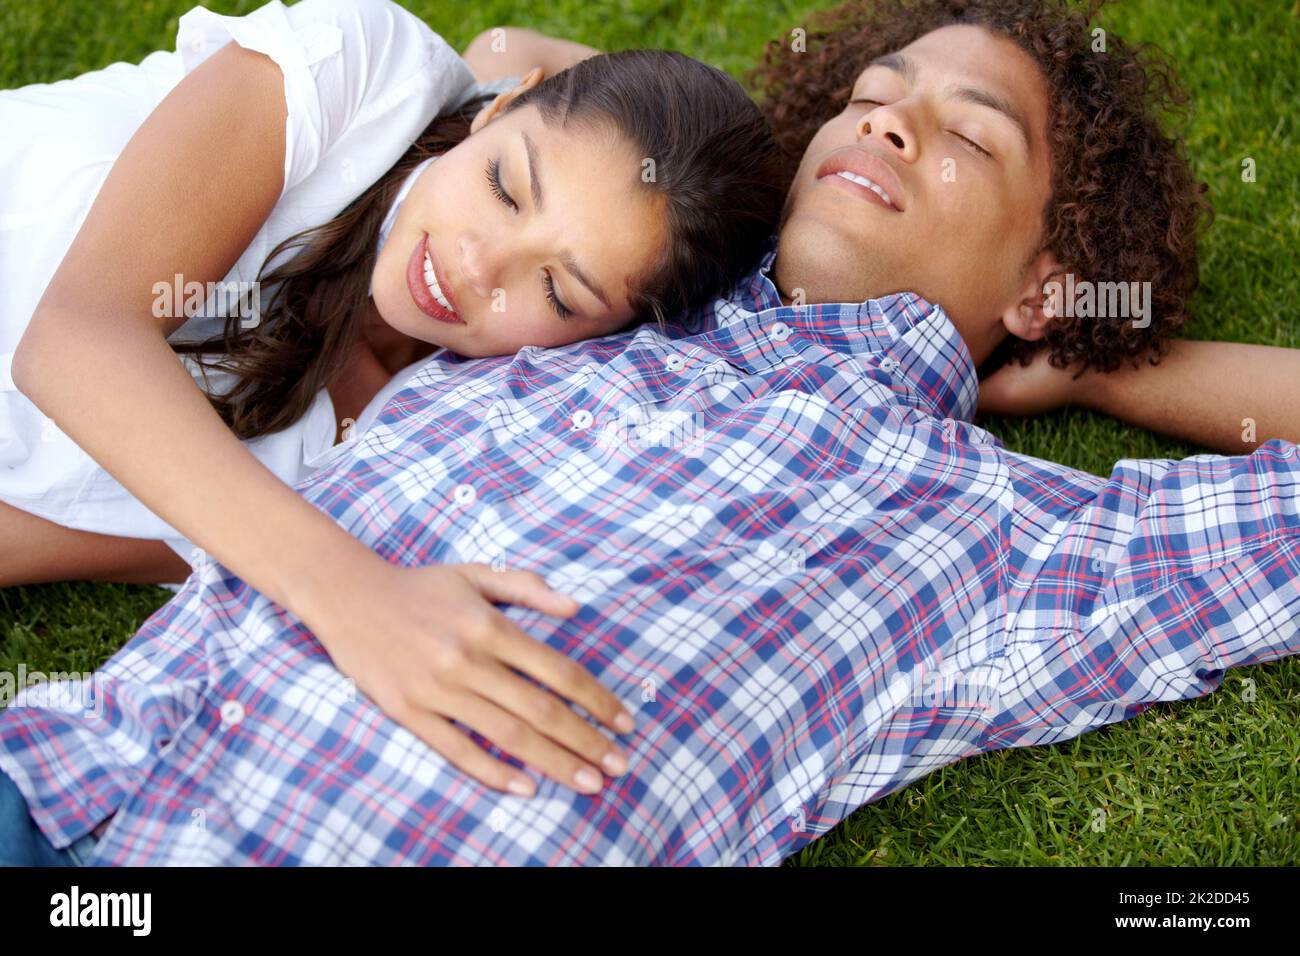 Lazy afternoon together. Shot of a happy young couple napping together on the lawn. Stock Photo